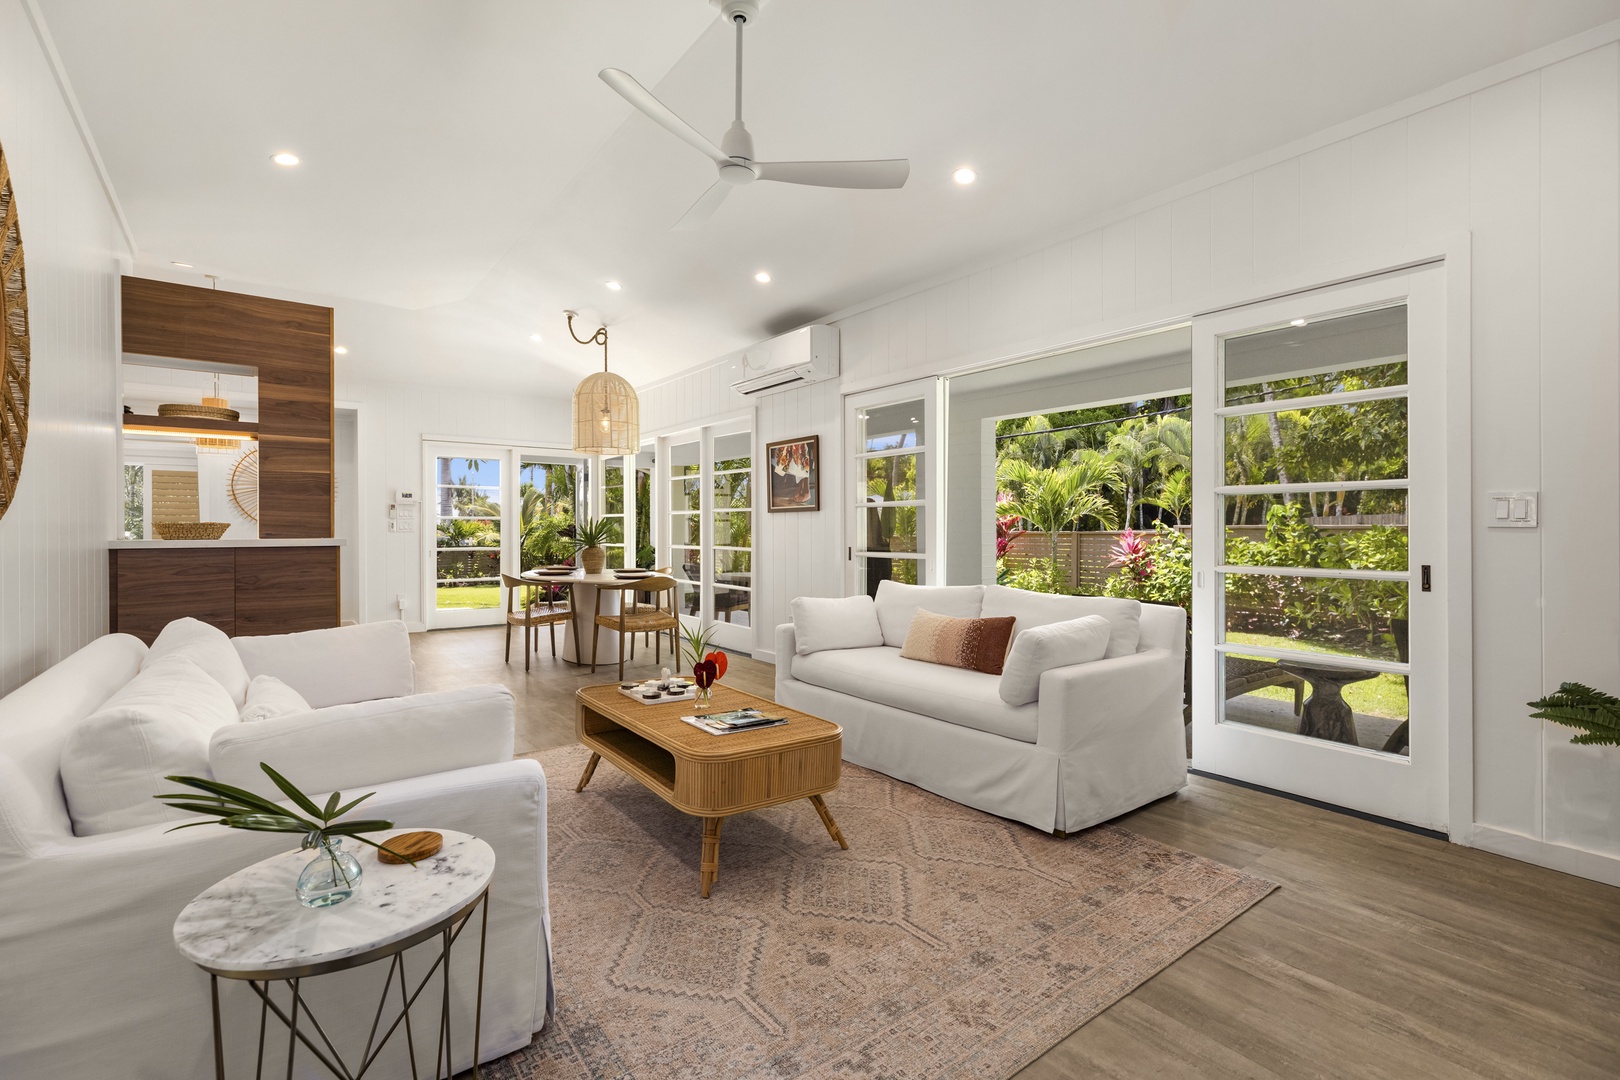 Kailua Vacation Rentals, Lanikai Hideaway - Expansive windows and sliding doors bring the outside in